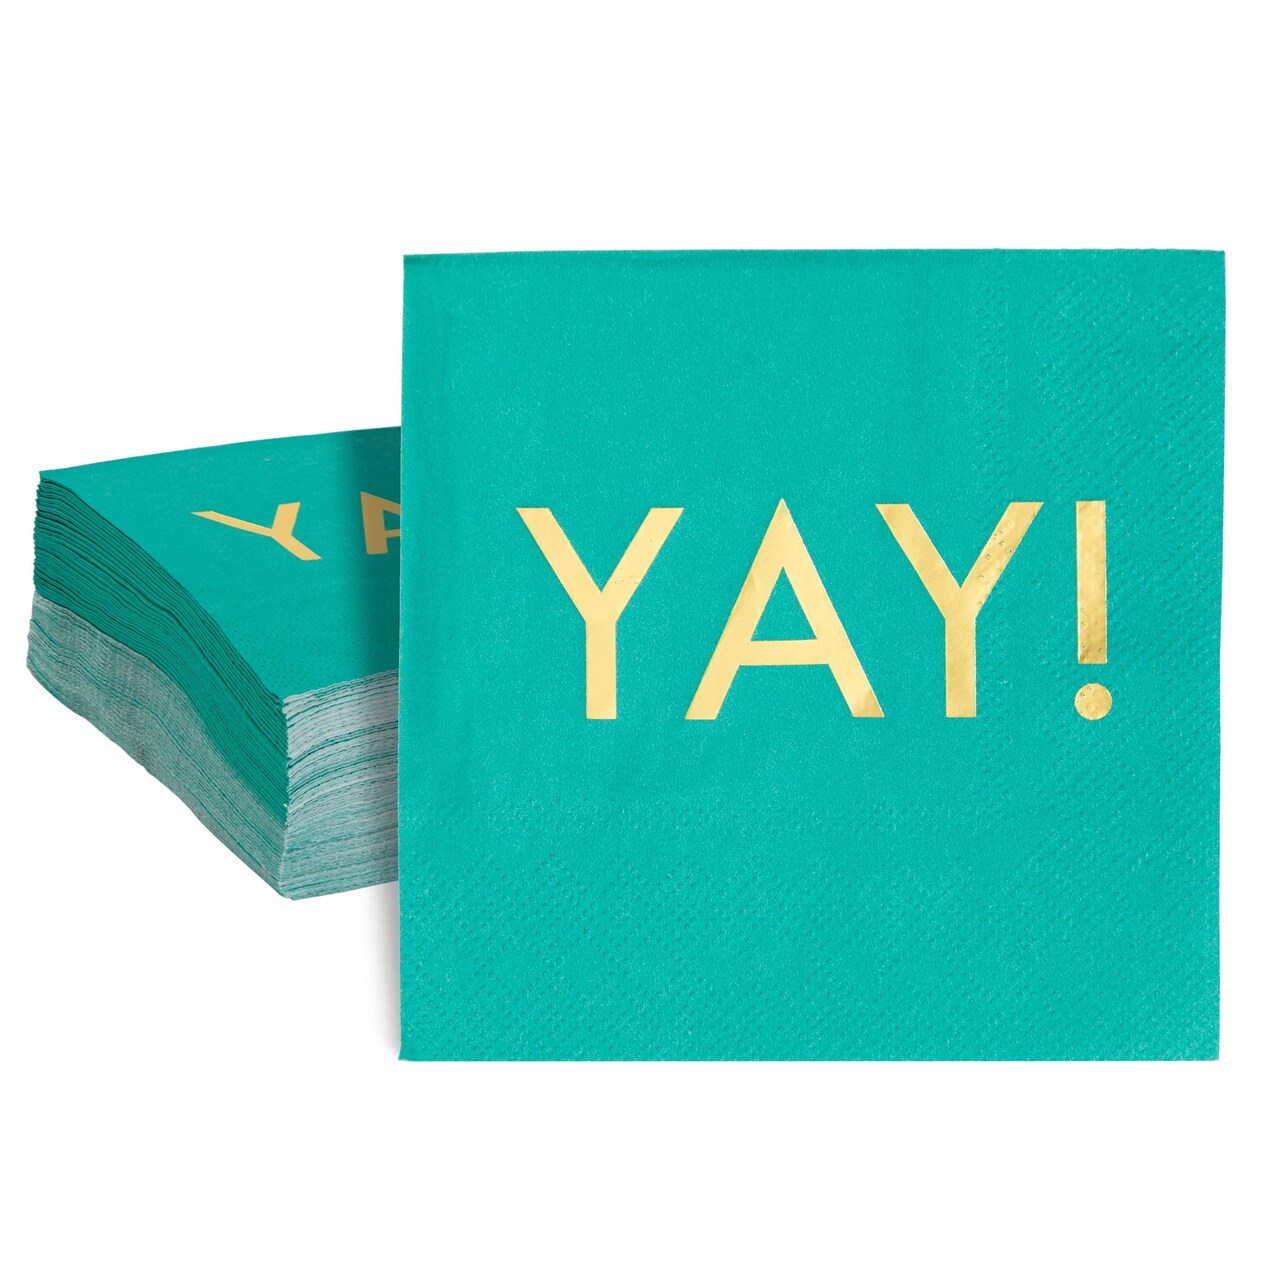 50 Pack Teal Paper Napkins with Gold Foil YAY for Party Supplies (3-Ply, 5 x 5 In)